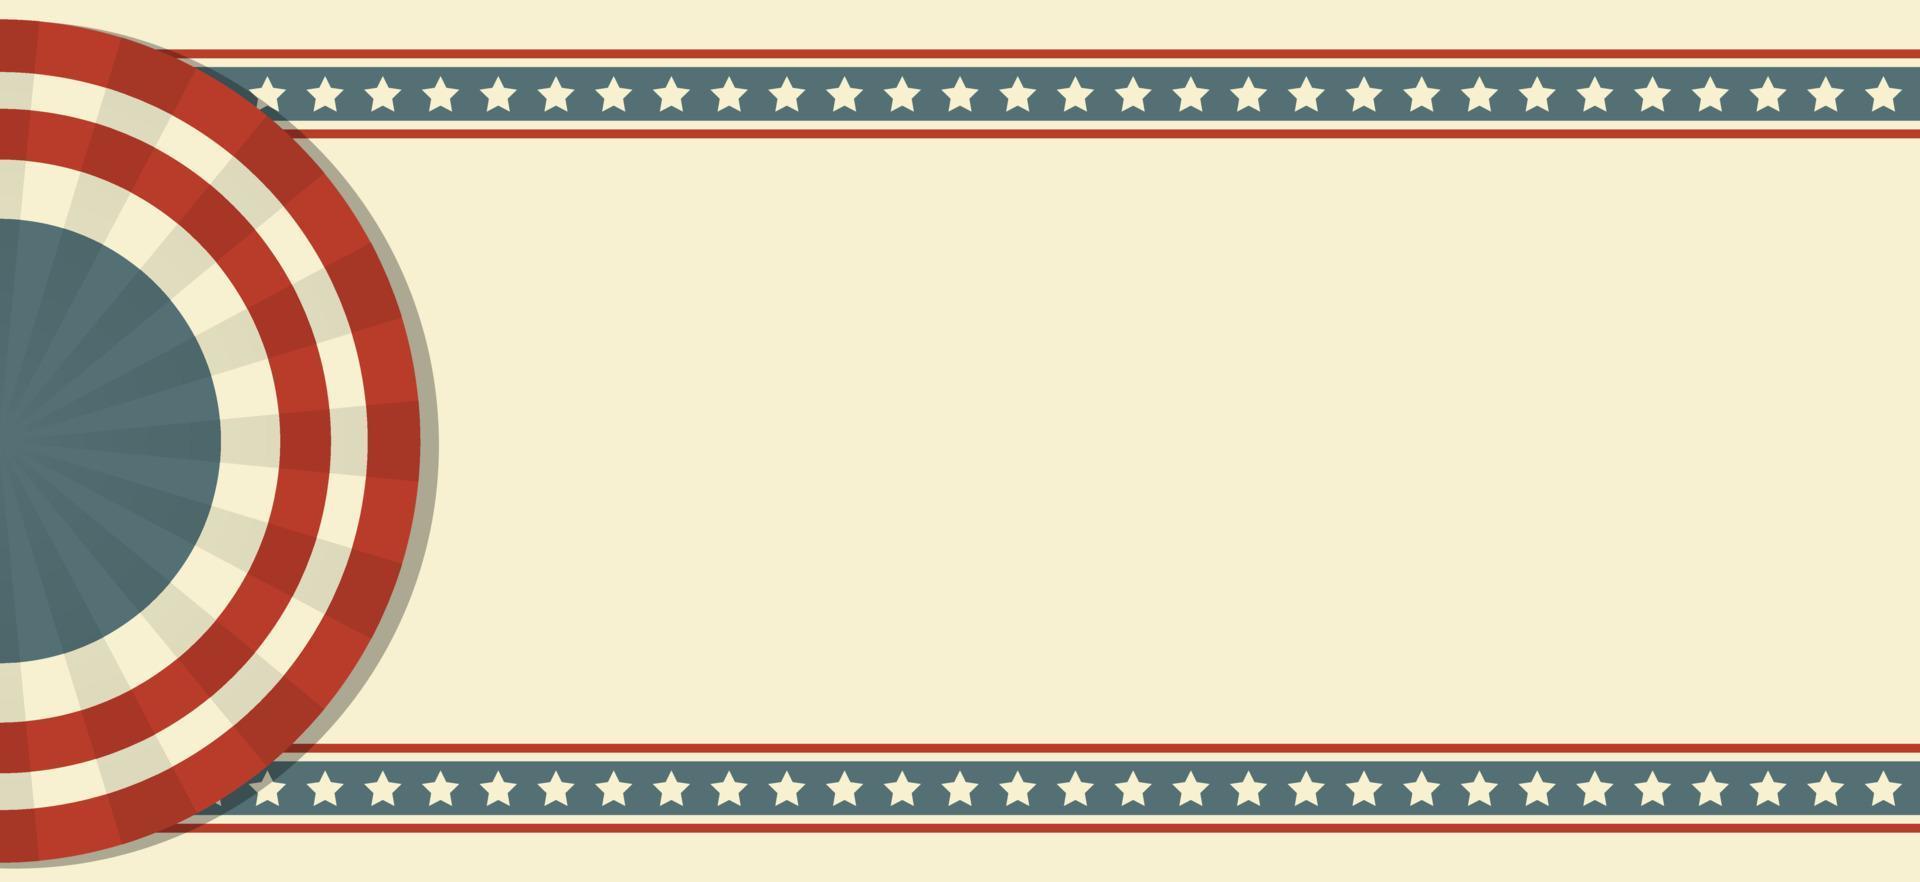 happy independence day 4th of July in retro style background vector